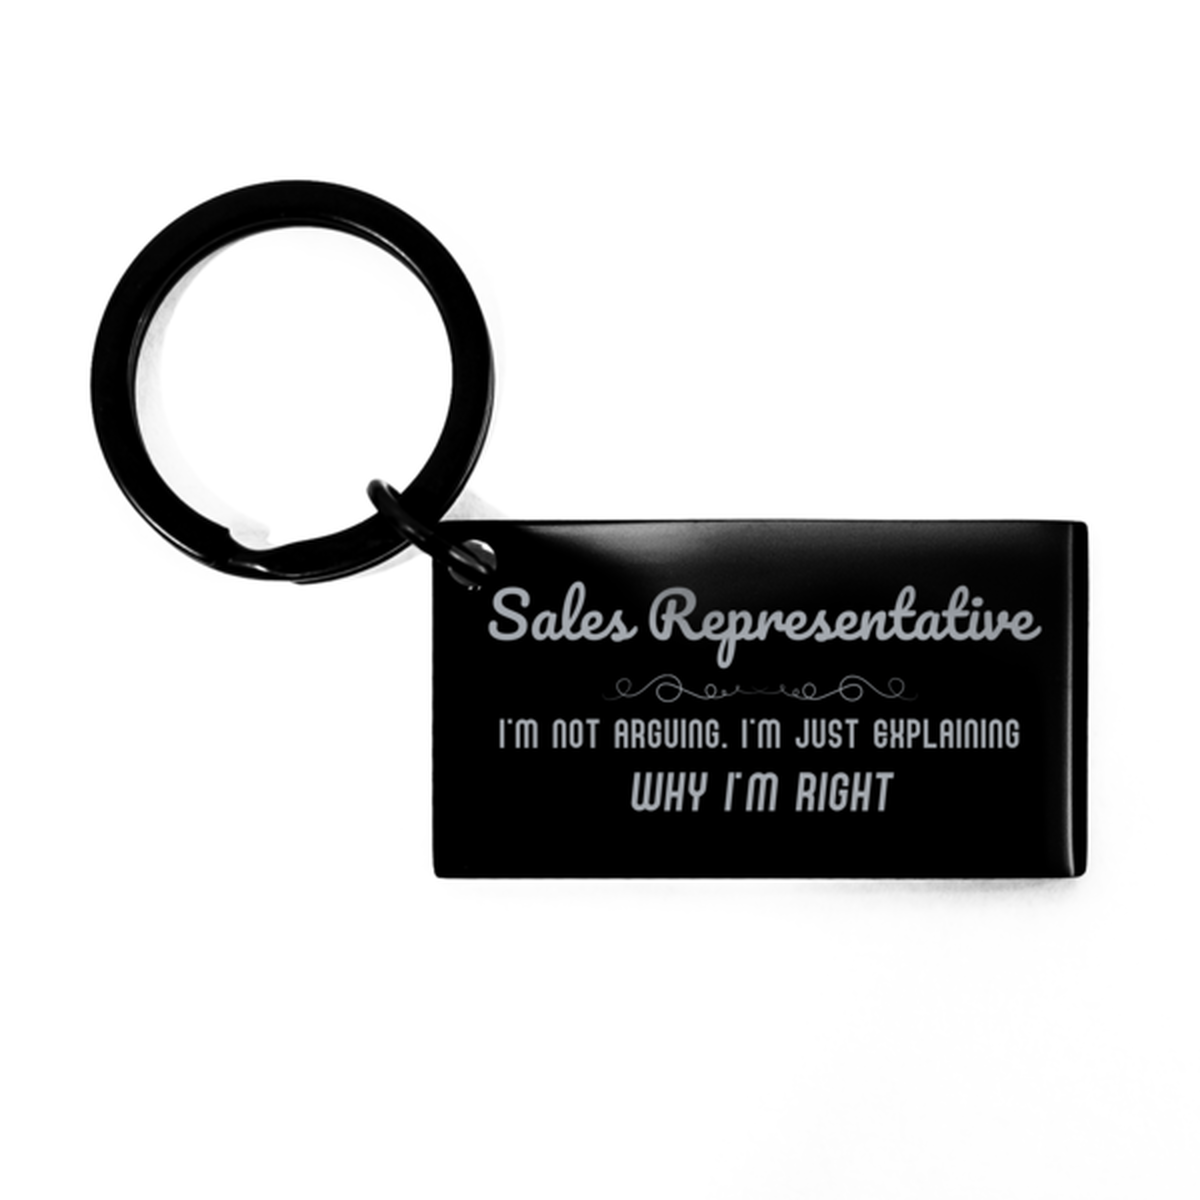 Sales Representative I'm not Arguing. I'm Just Explaining Why I'm RIGHT Keychain, Funny Saying Quote Sales Representative Gifts For Sales Representative Graduation Birthday Christmas Gifts for Men Women Coworker